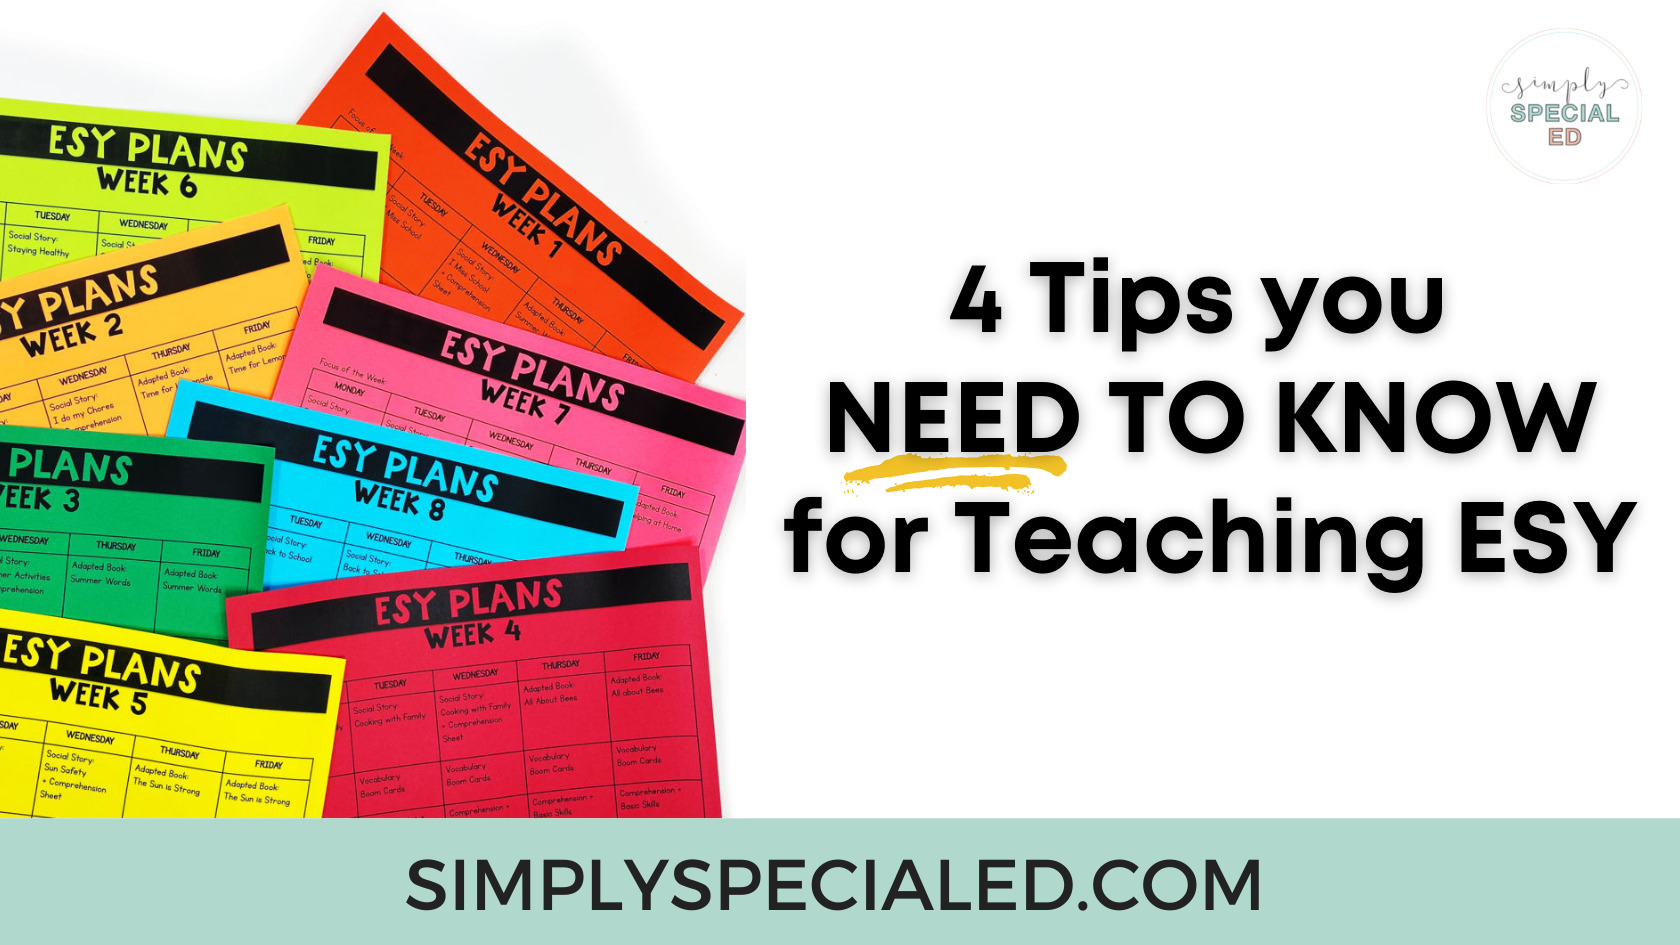 4 tips you need to know for teaching ESY header image for blog